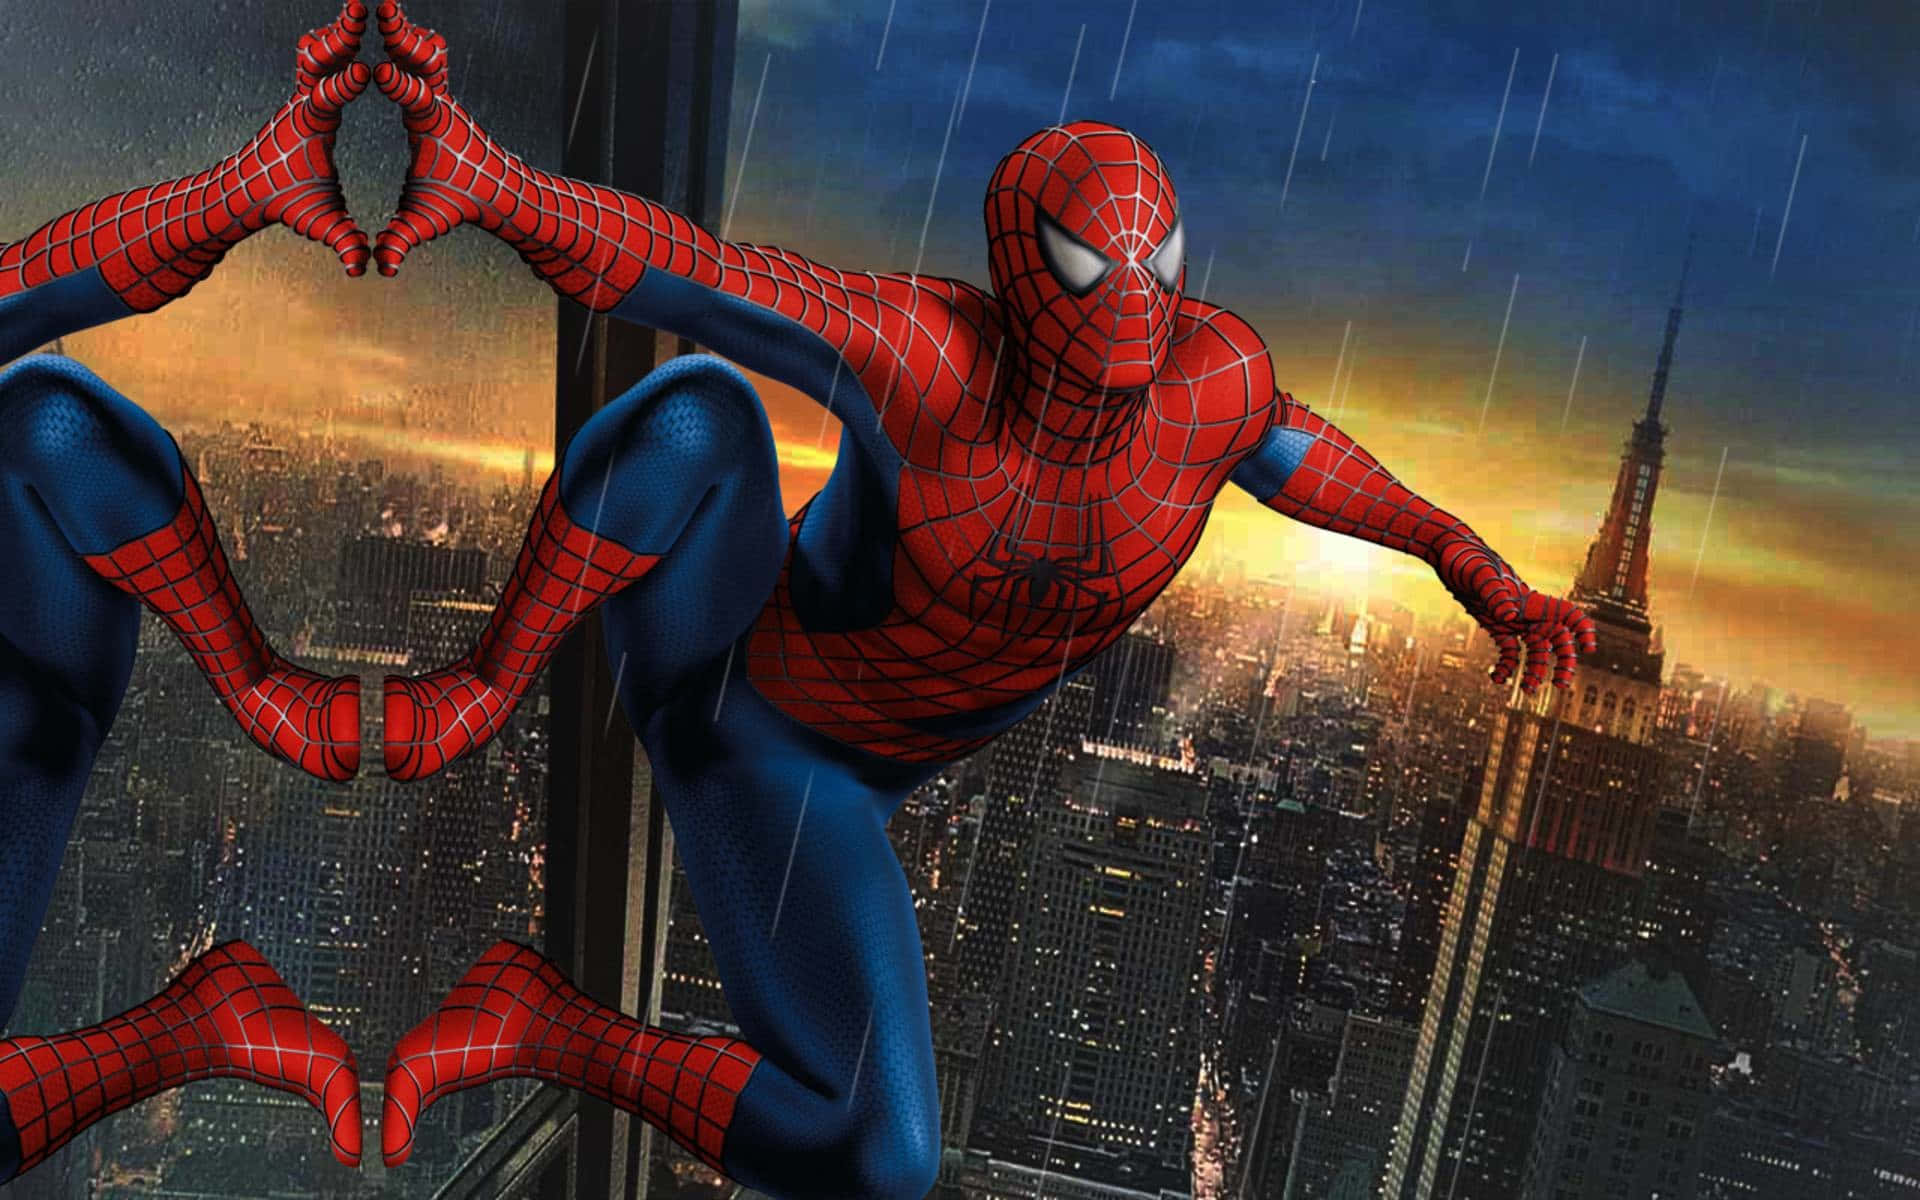 Ultimate Spider-Man swinging through the city Wallpaper